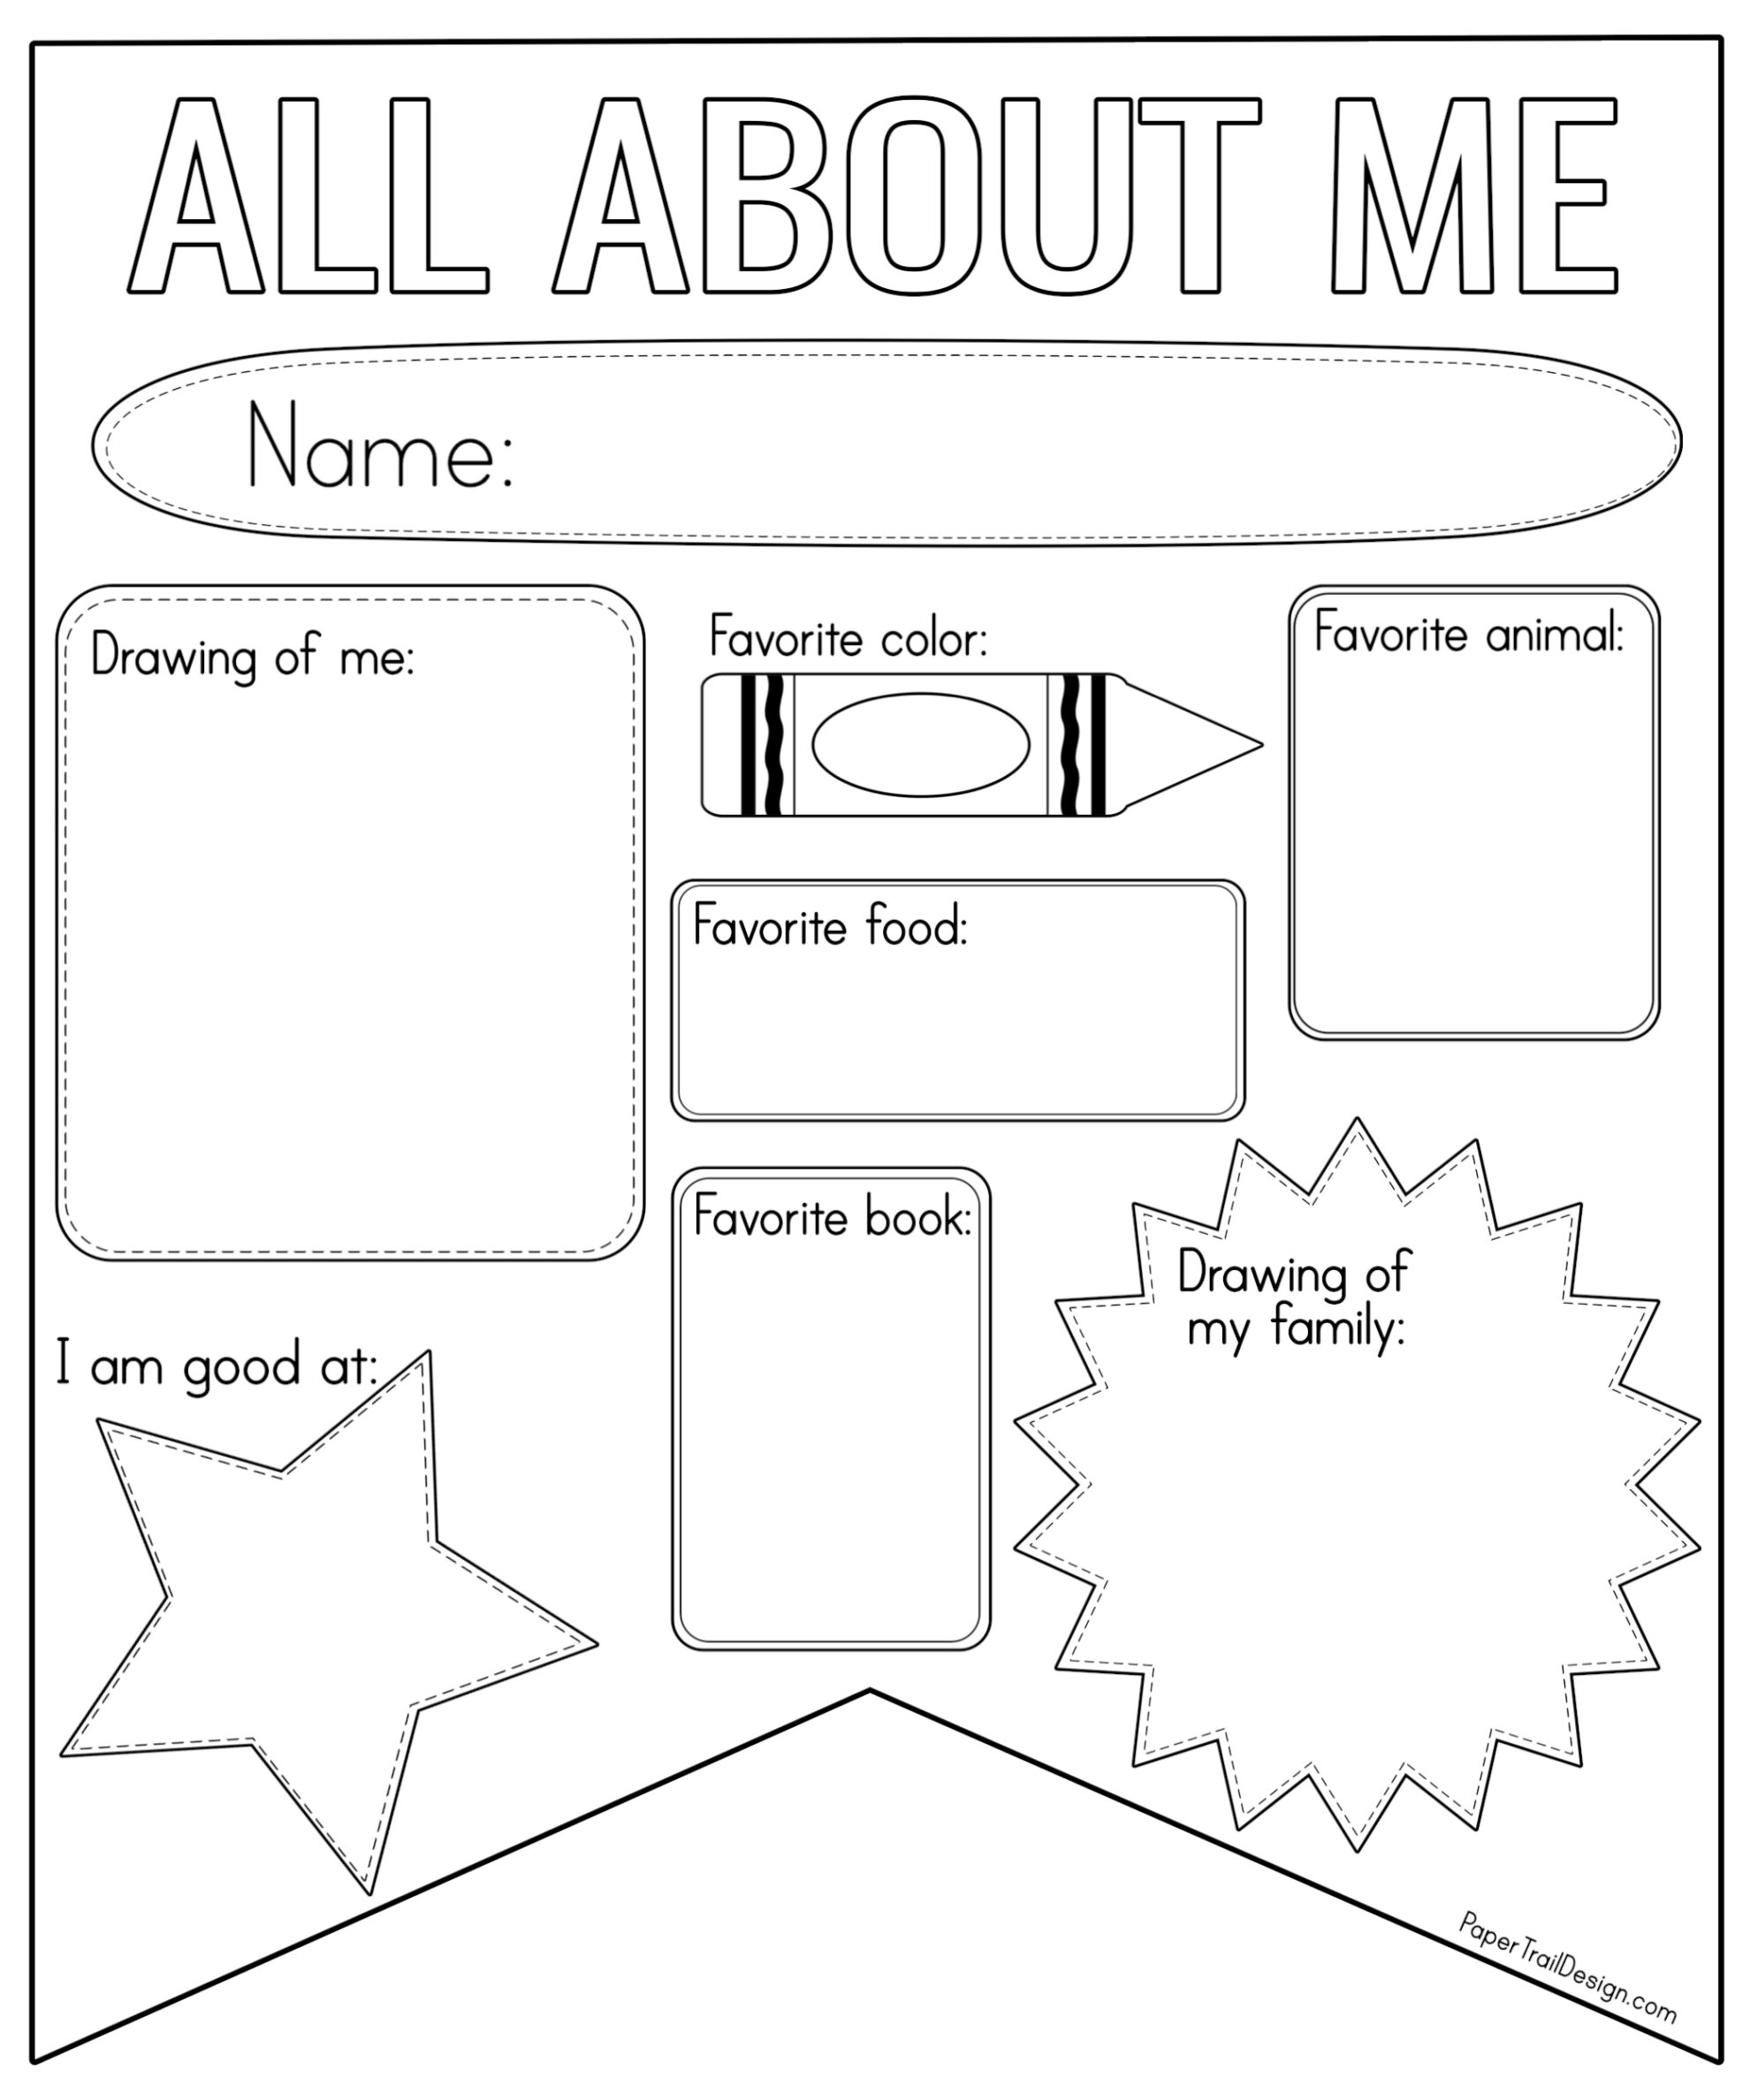 All About Me Worksheet Printable - Paper Trail Design Throughout Getting To Know You Worksheet